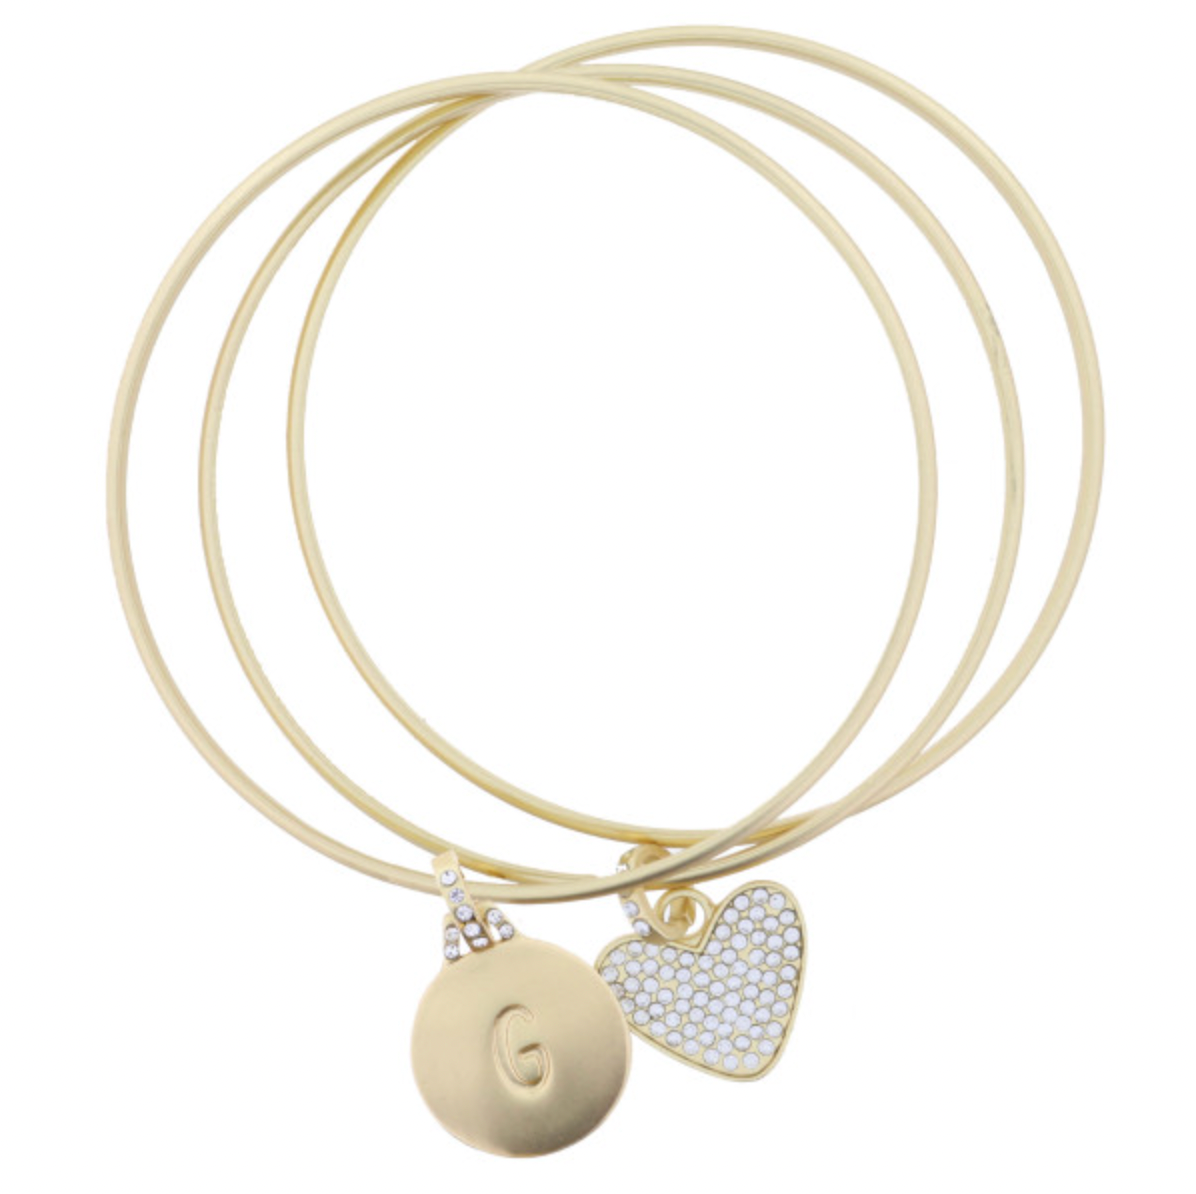 GOLD HEART BANGLE INITIAL S/3